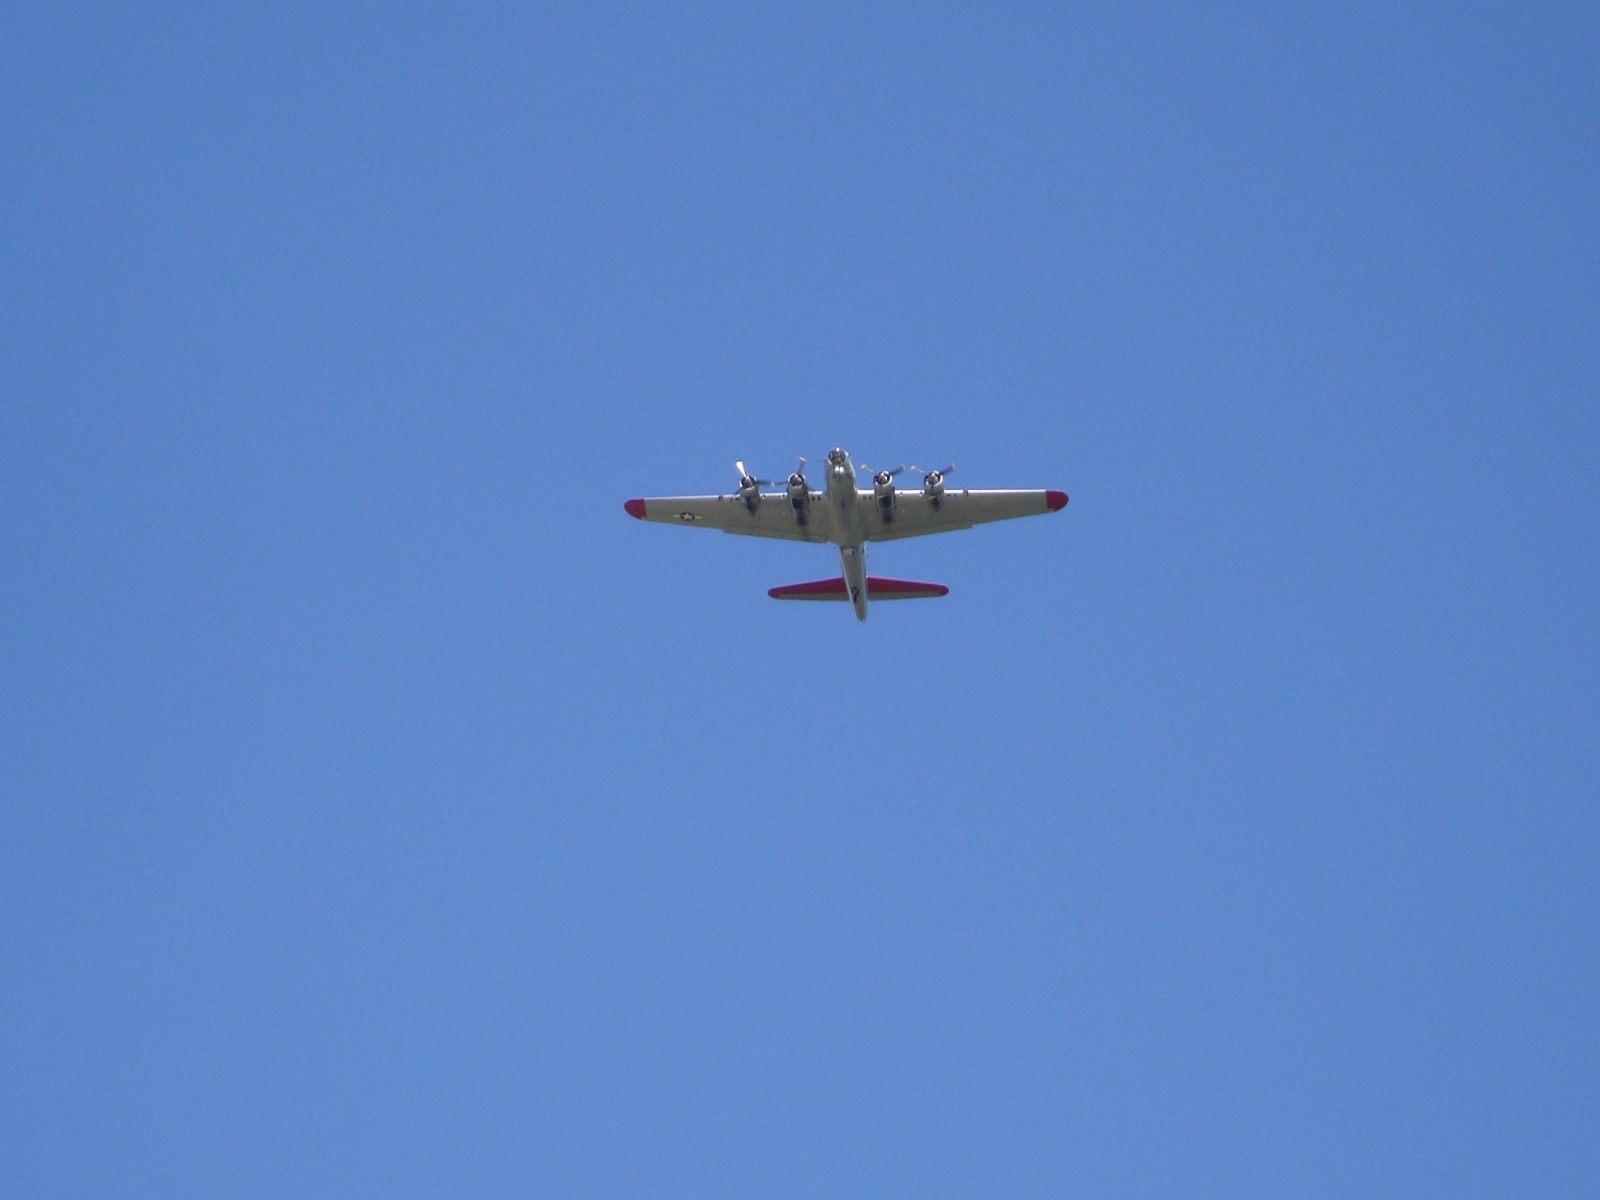 One of my favorite planes is the World War II bomber, the B-17.  I captured this one as it flew overhead at an air show in Spokane.